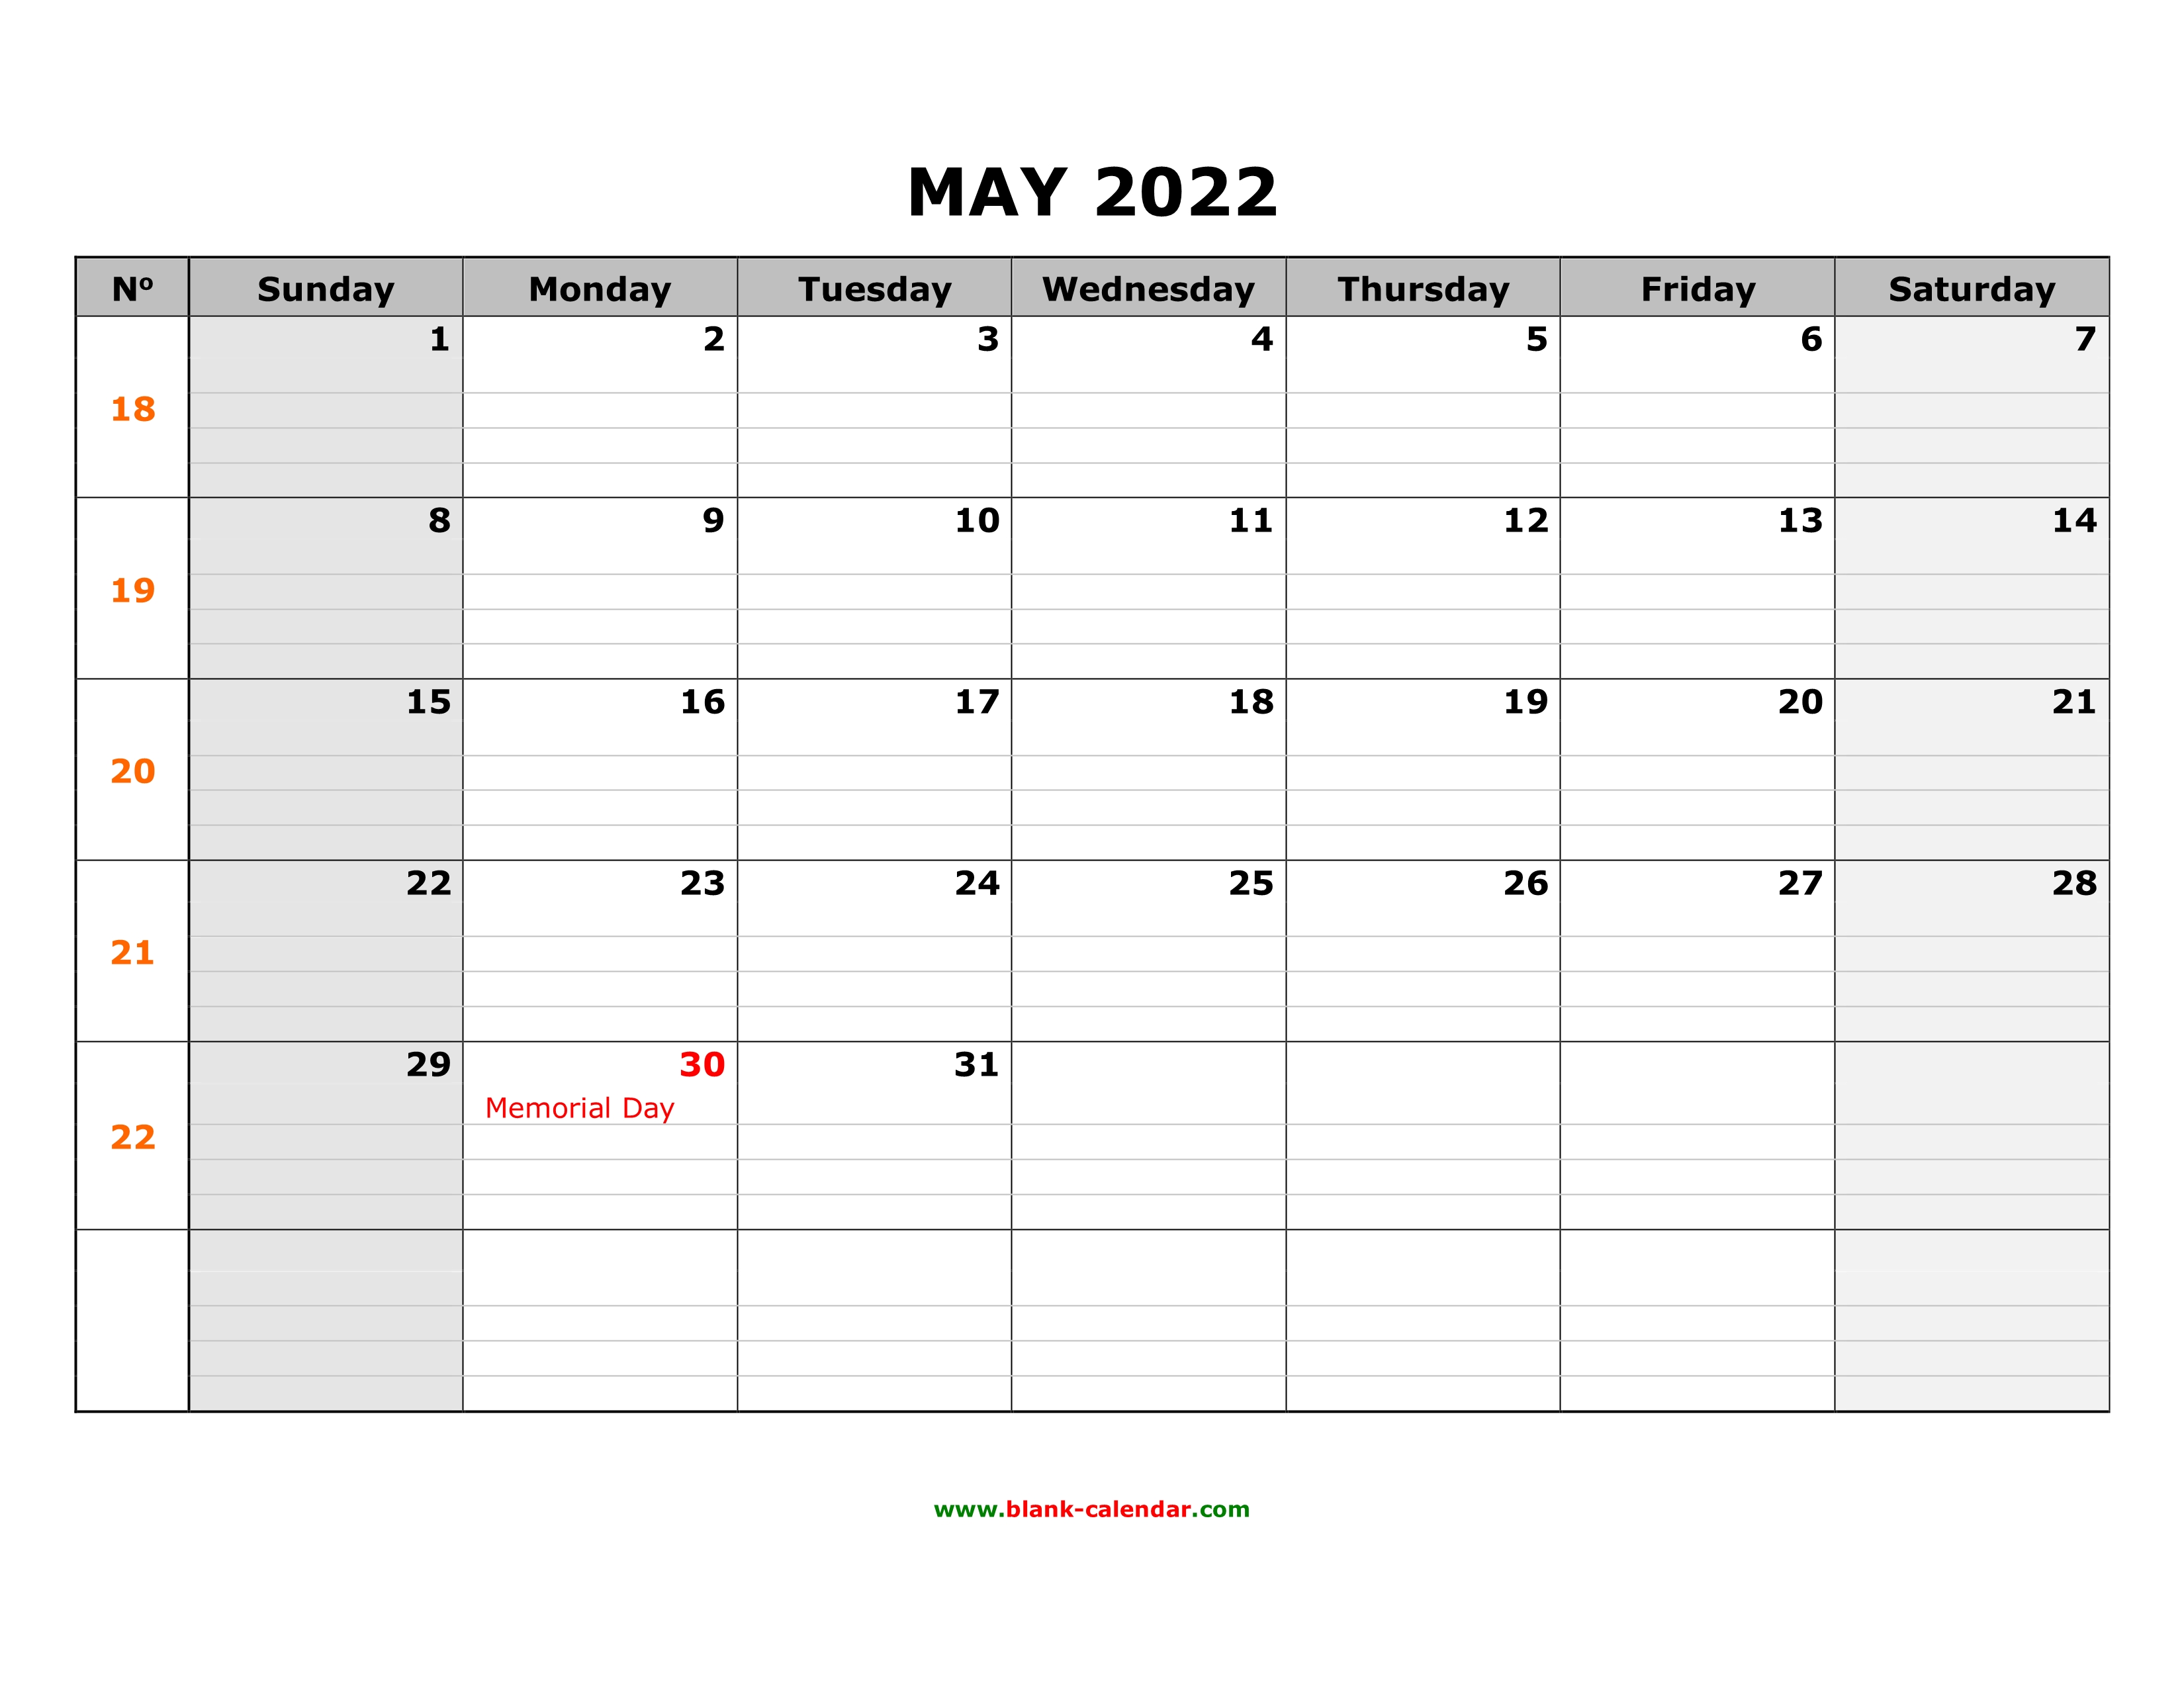 free-download-printable-may-2022-calendar-large-box-grid-space-for-notes